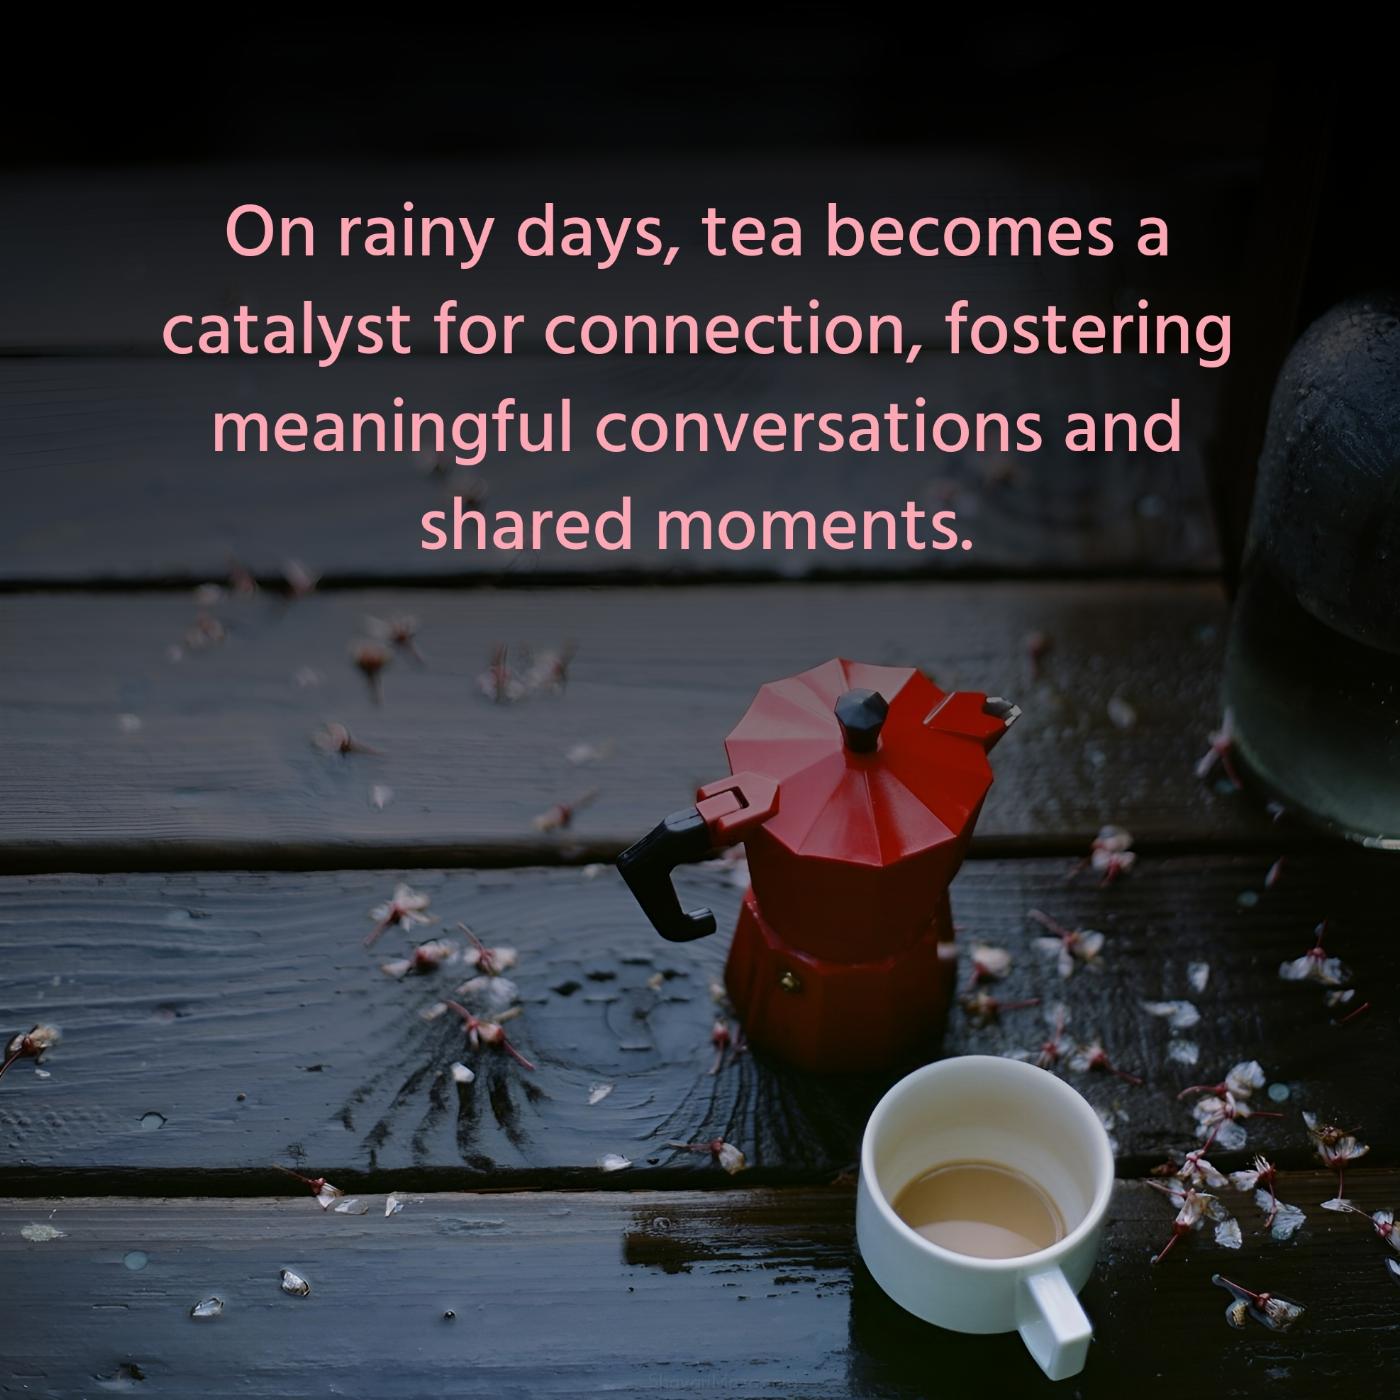 On rainy days tea becomes a catalyst for connection